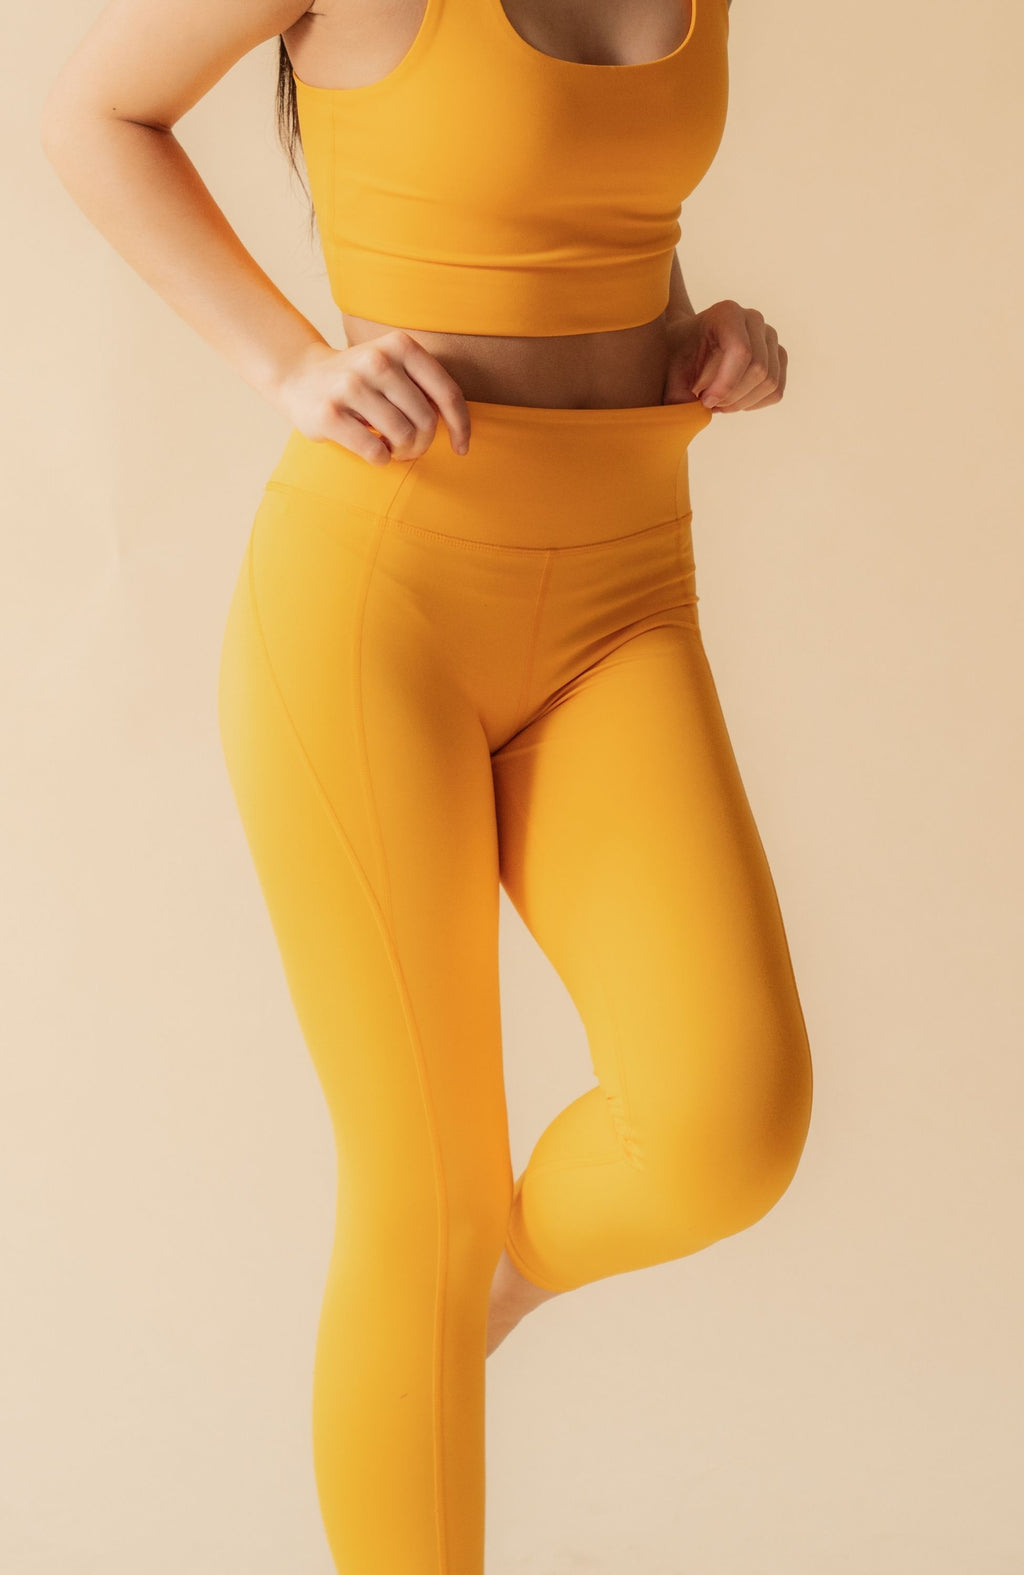 Shop Girlfriend Collective - Ethical + Sustainable Leggings